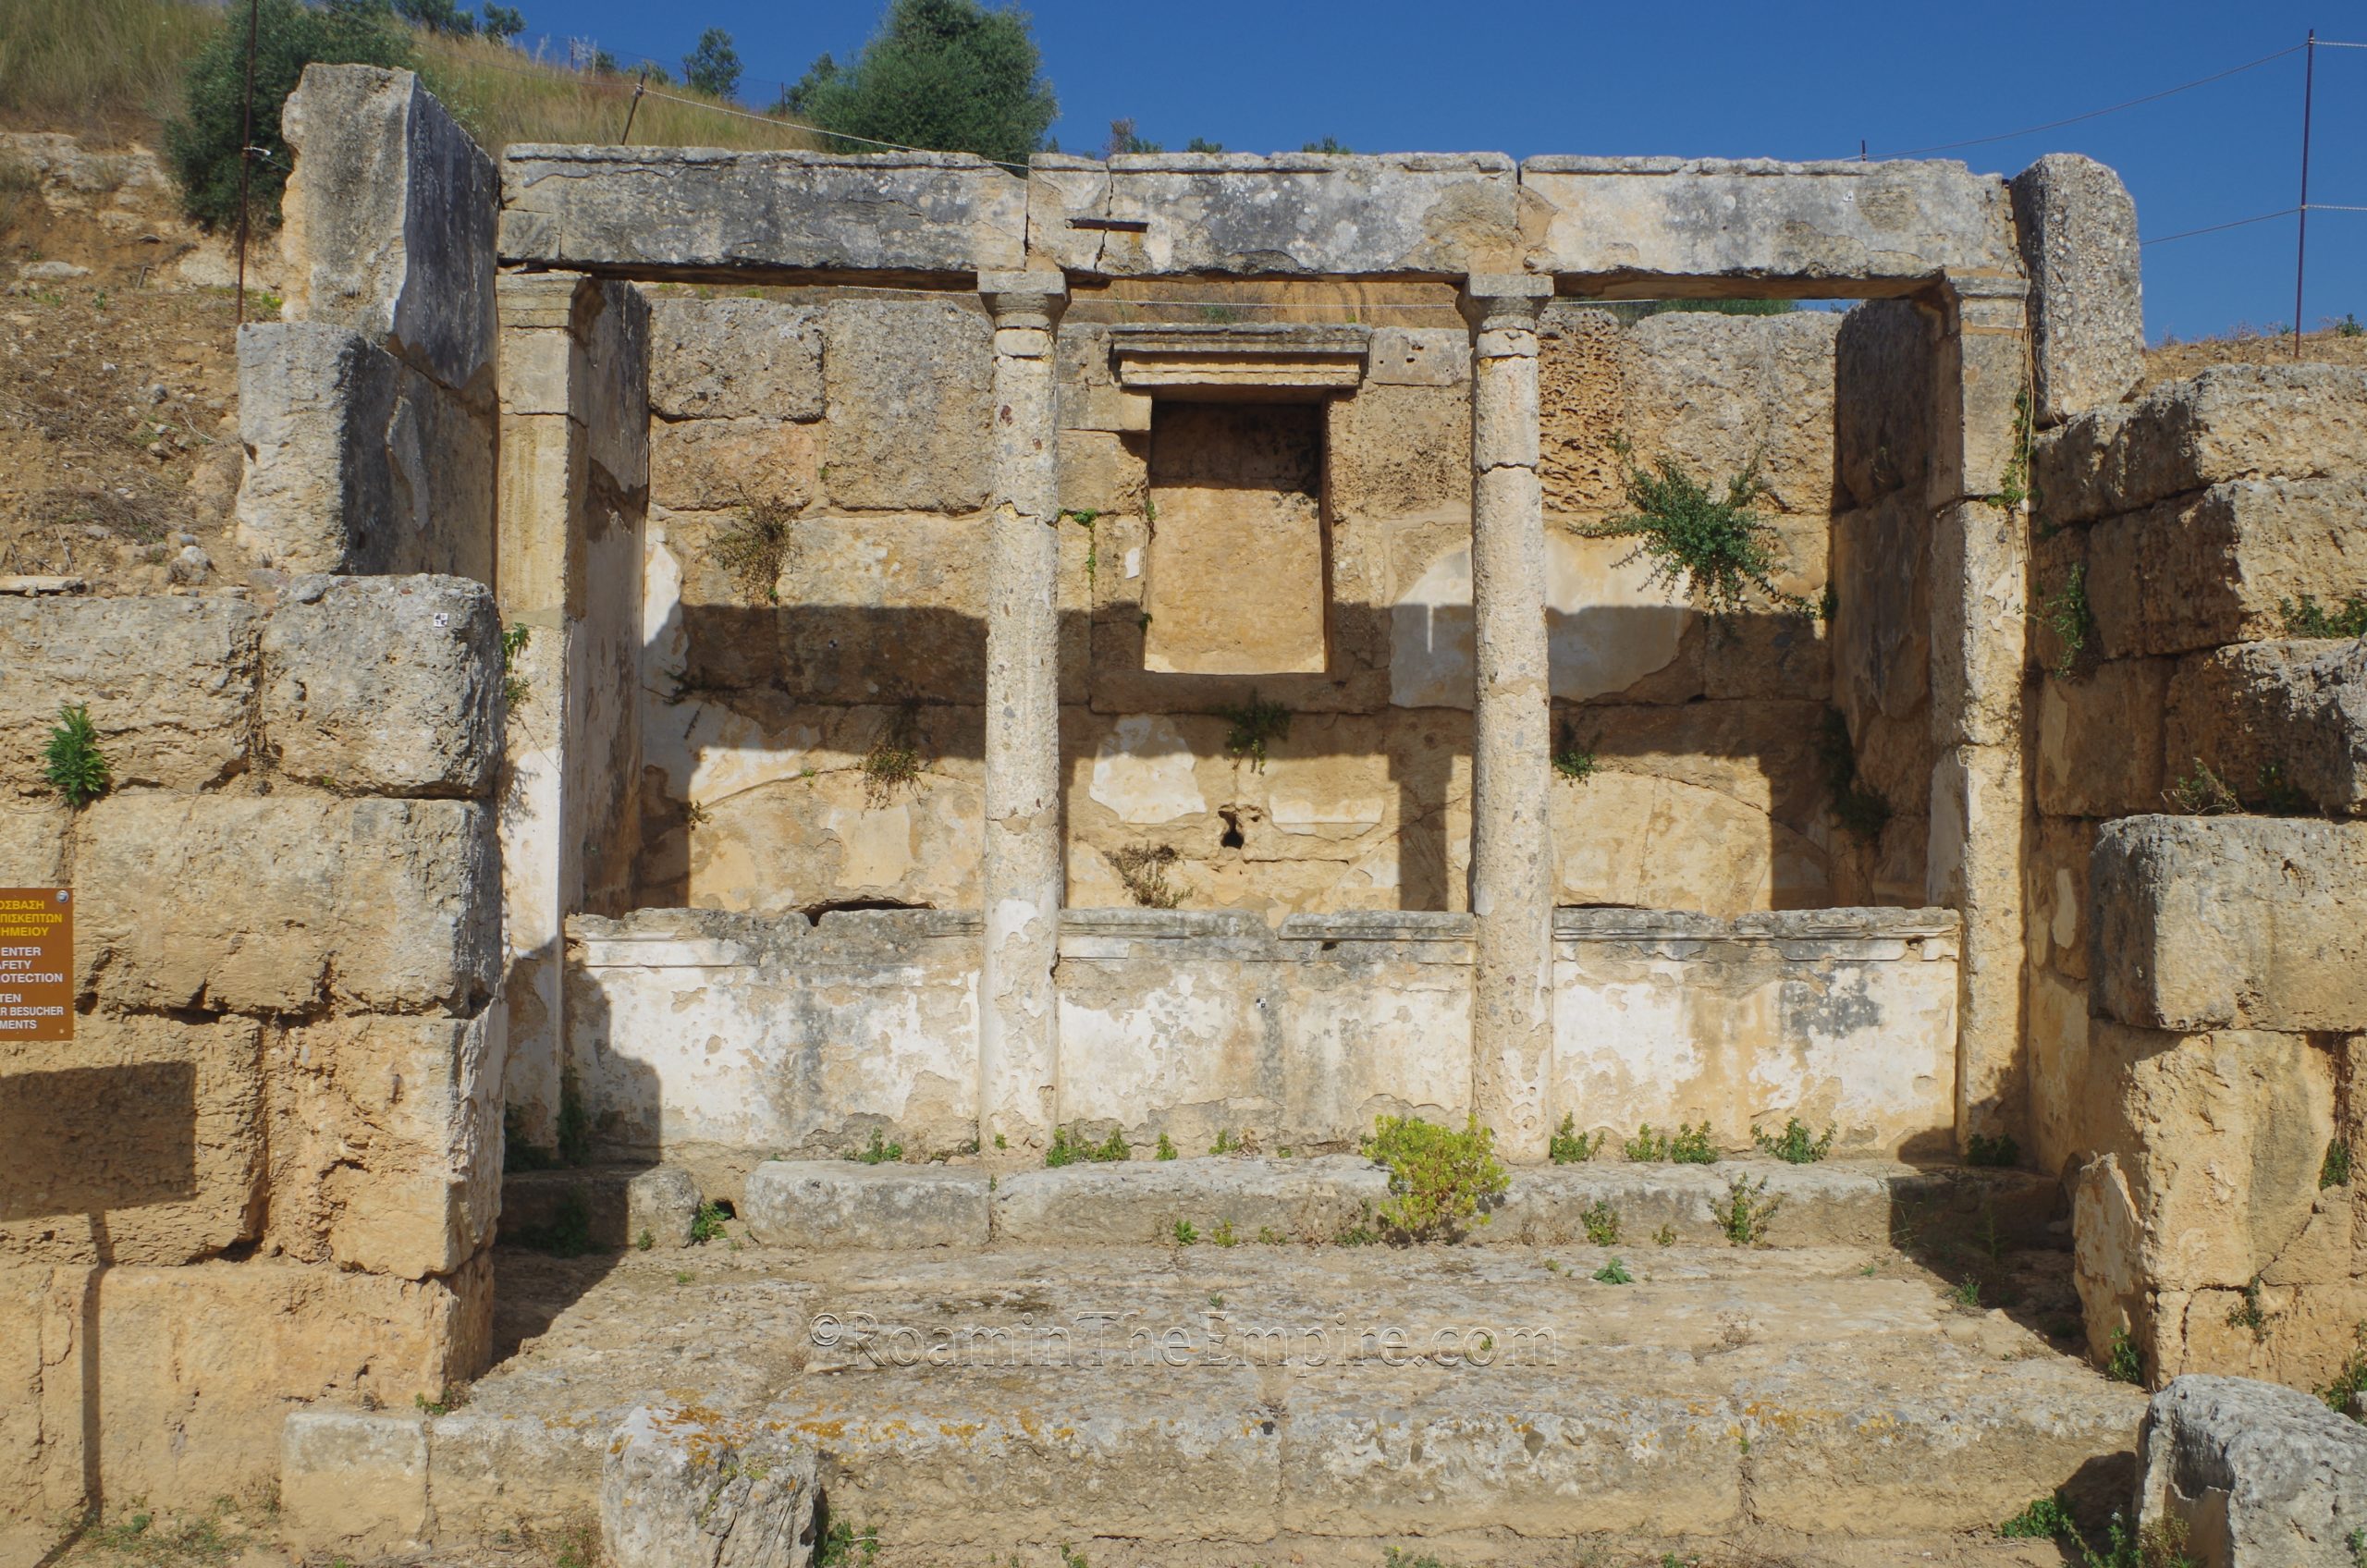 Fountain on the lower terrace of the palaestra/gymnasium. Sicyon.